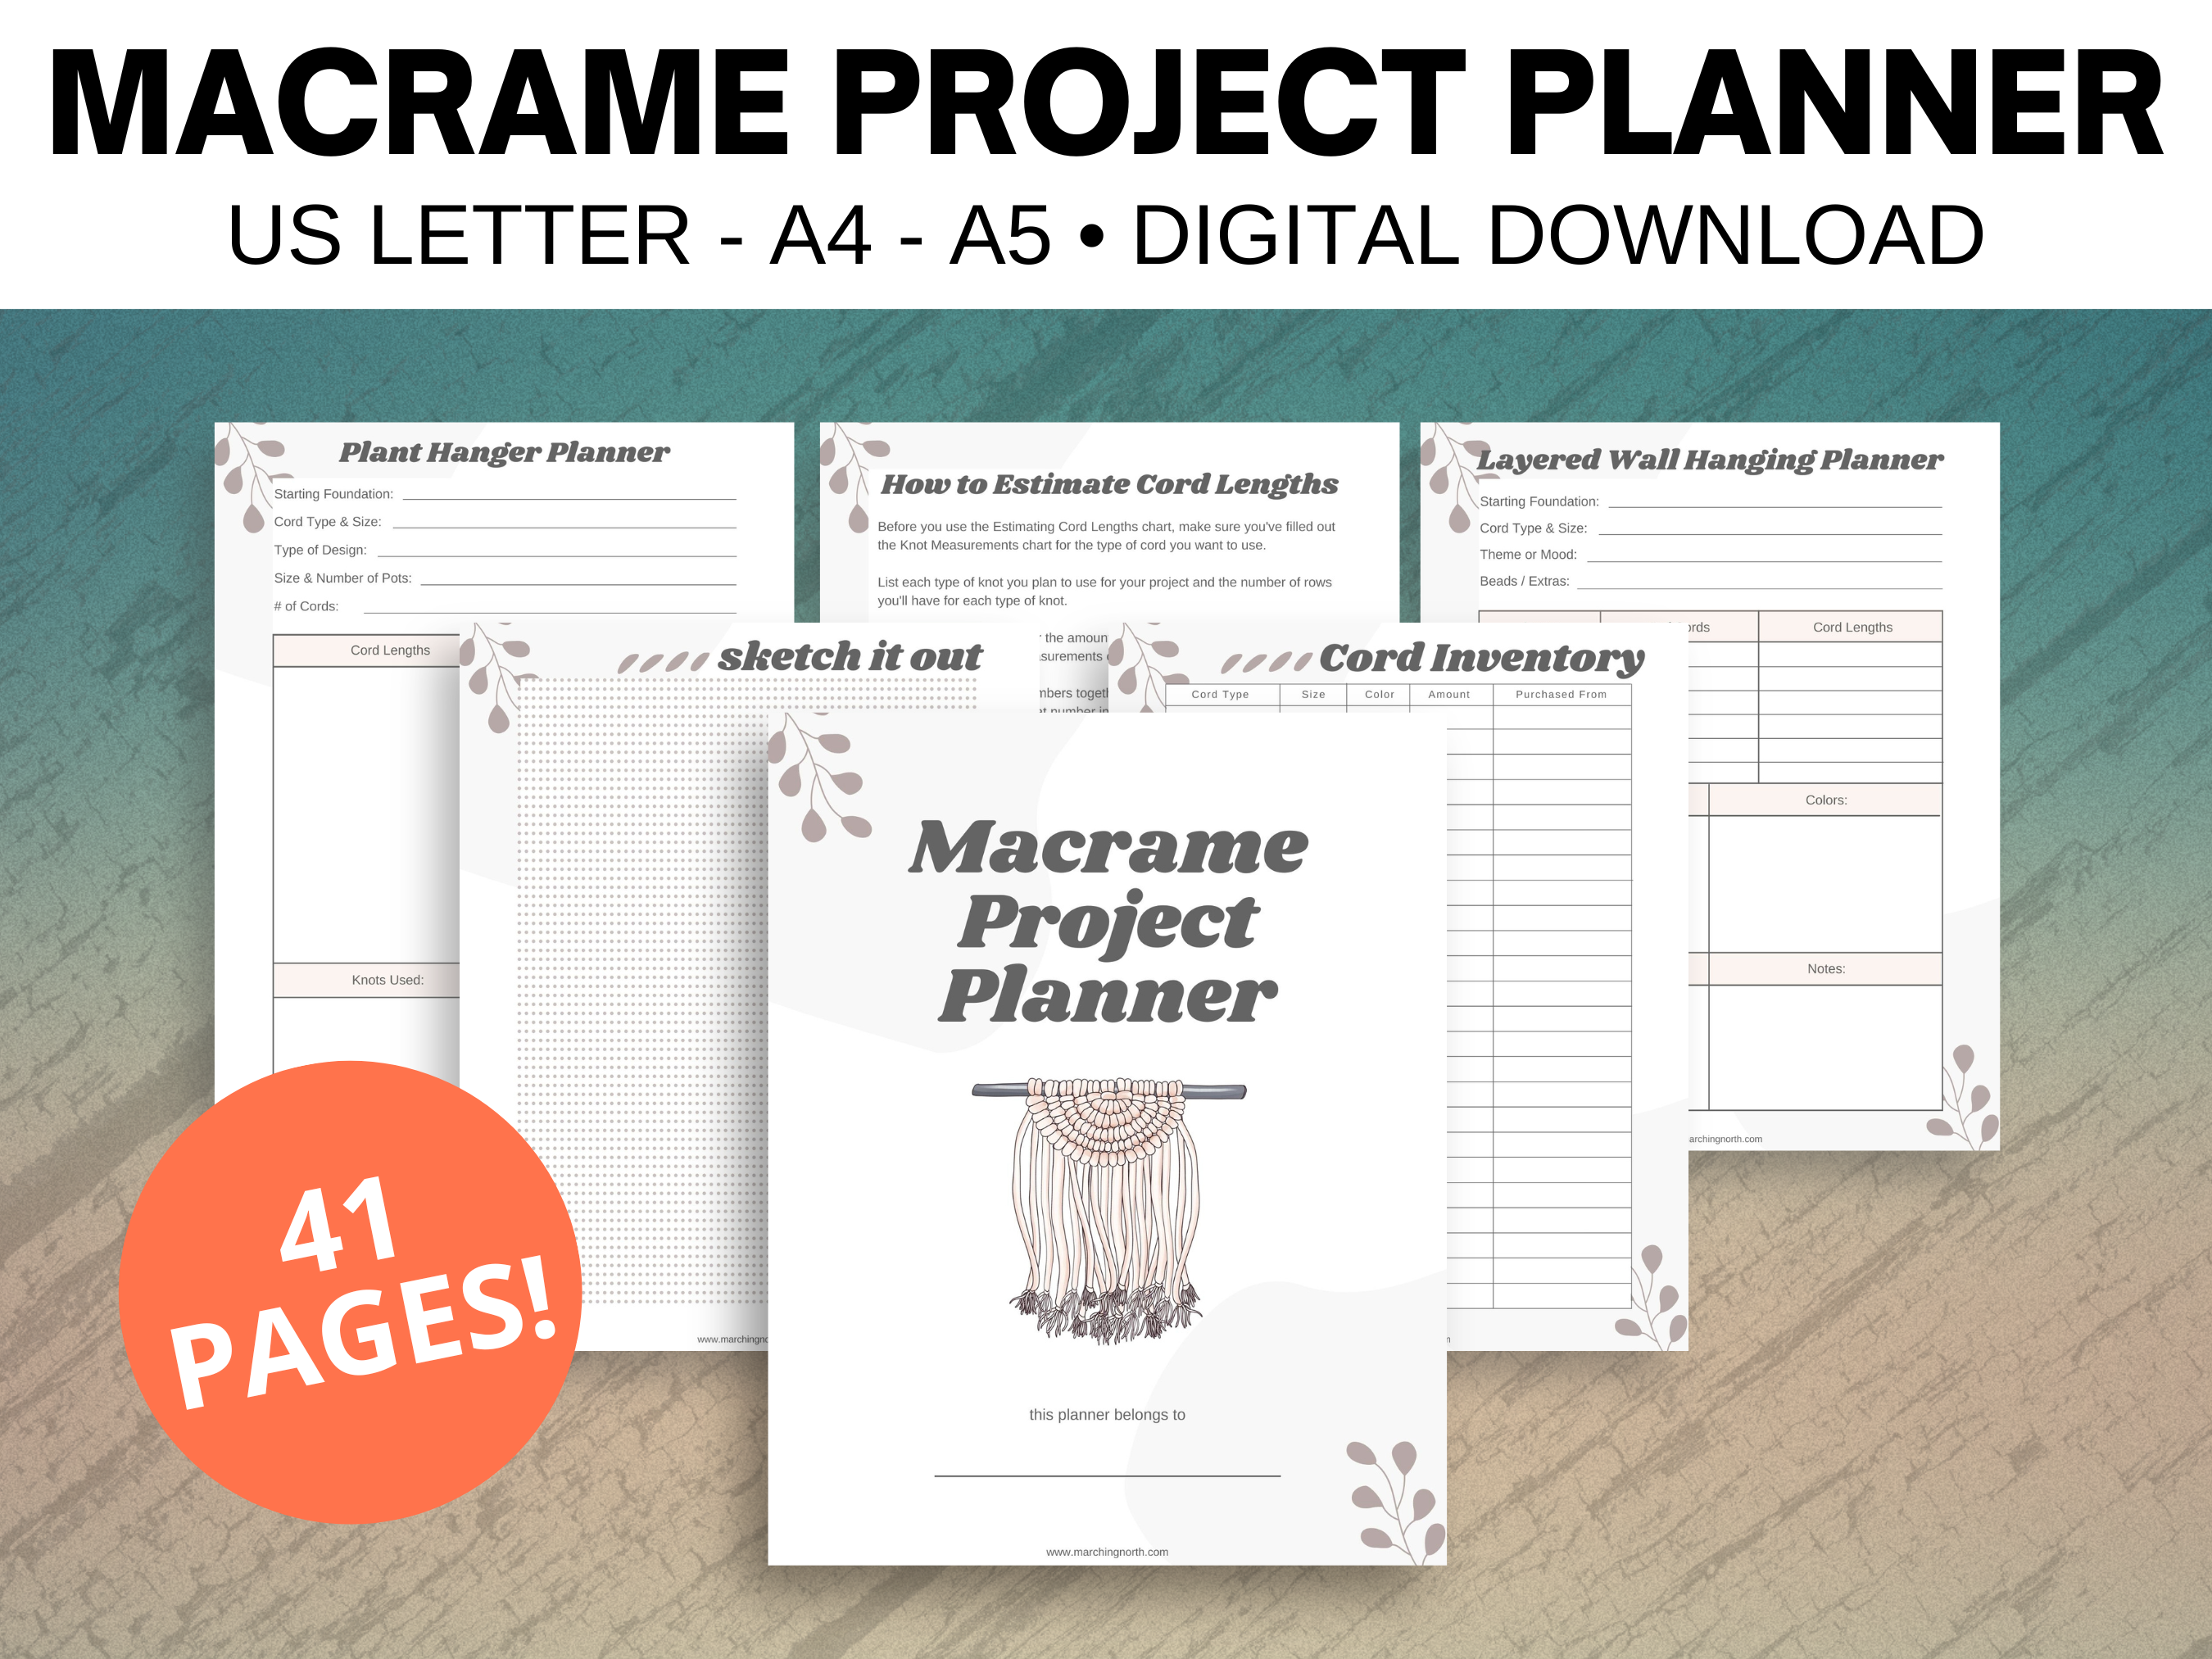 Mock up of Macrame Project Planner laying on a wooden desk